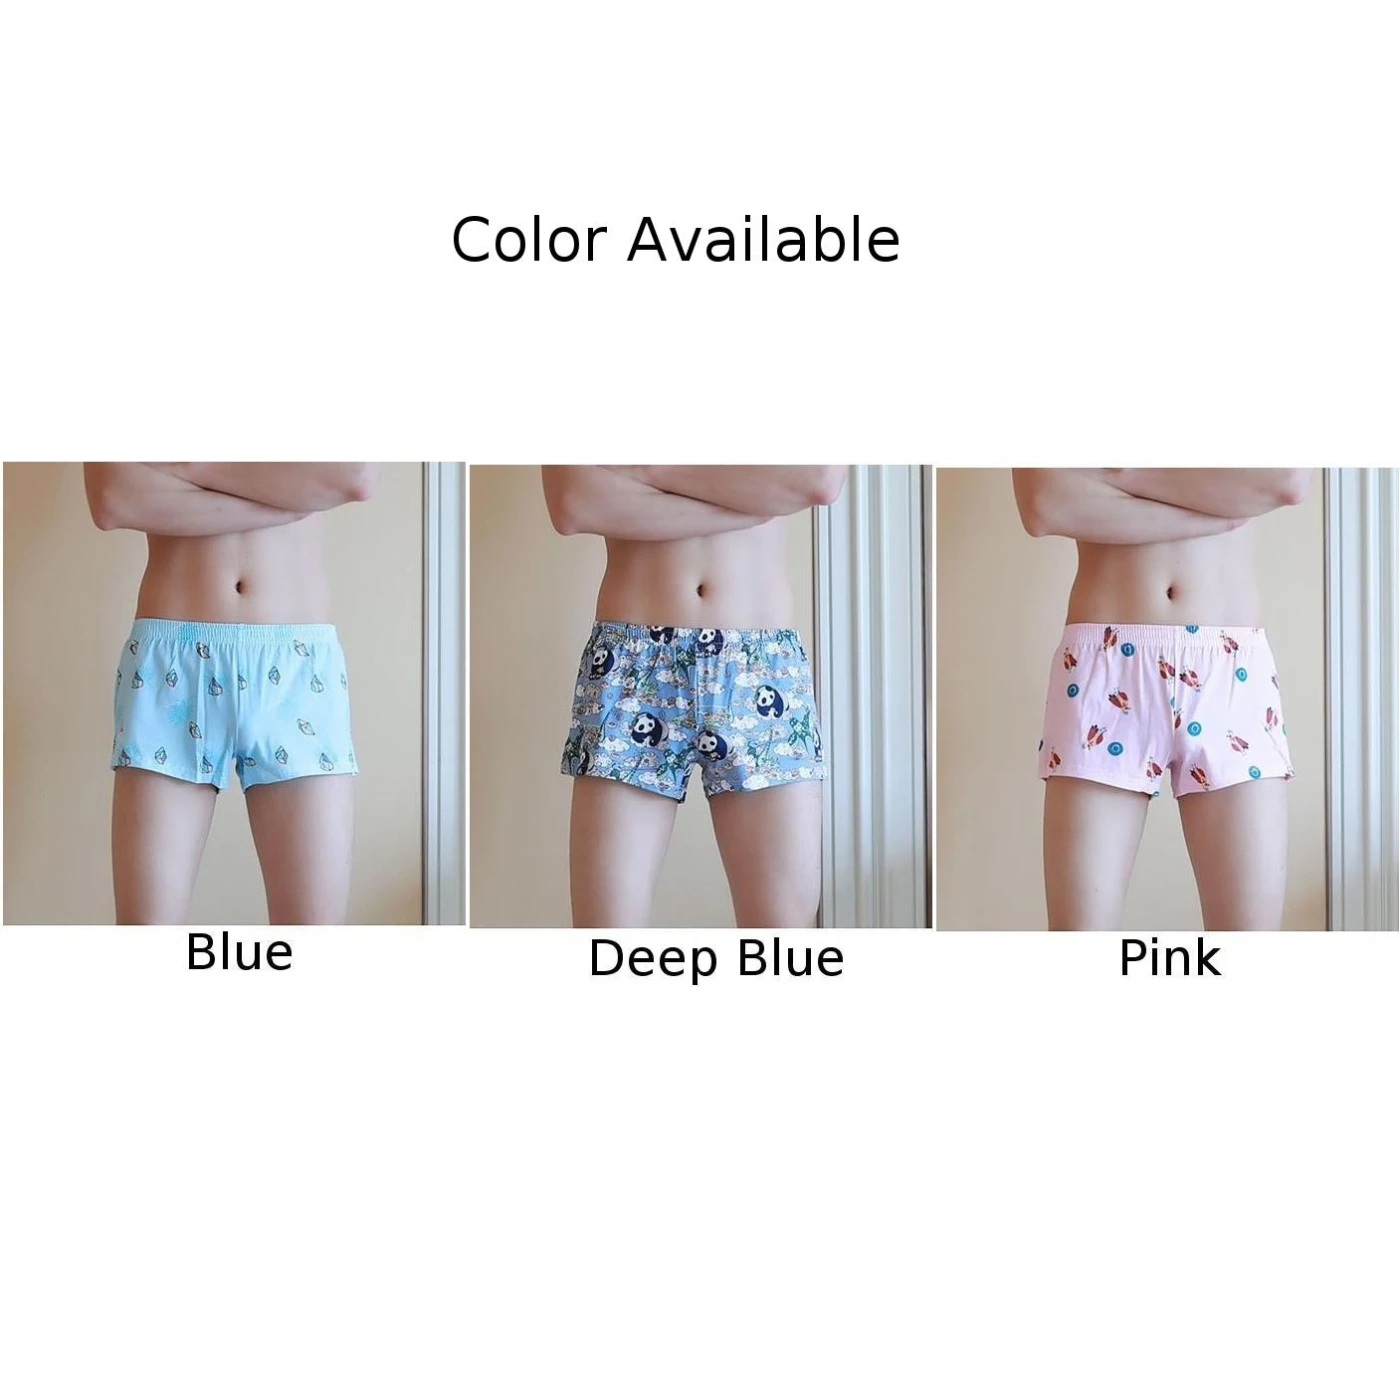 Mens Loose Boxers Cotton Underwear Shorts Loose Fit Aro Pants Casual  Comfortable Sleep Bottoms Man Breathable Print Underpant